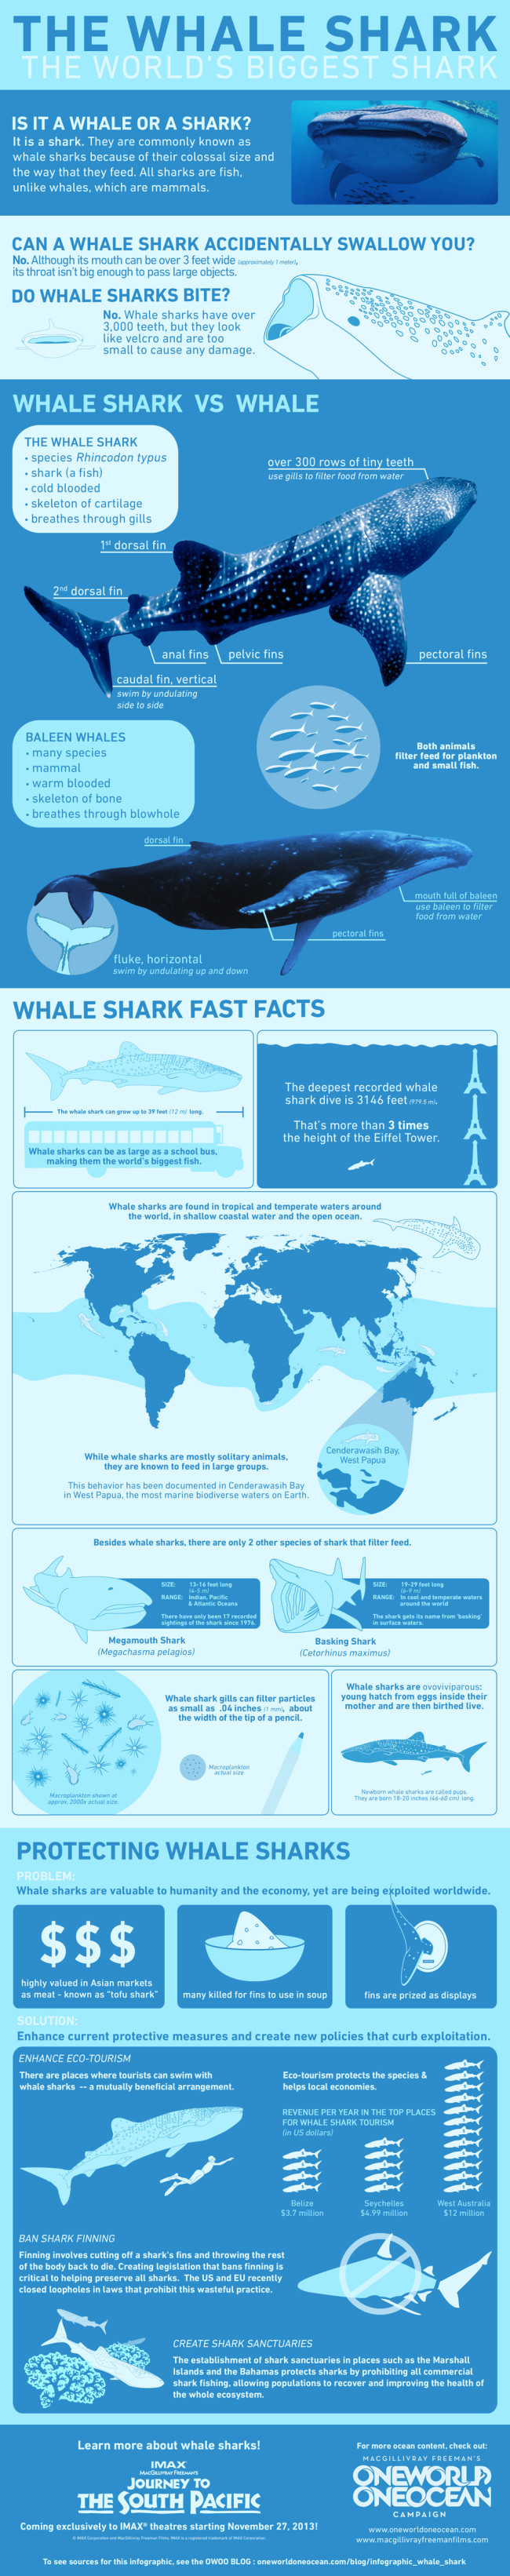 Whale Shark InfoGraphic